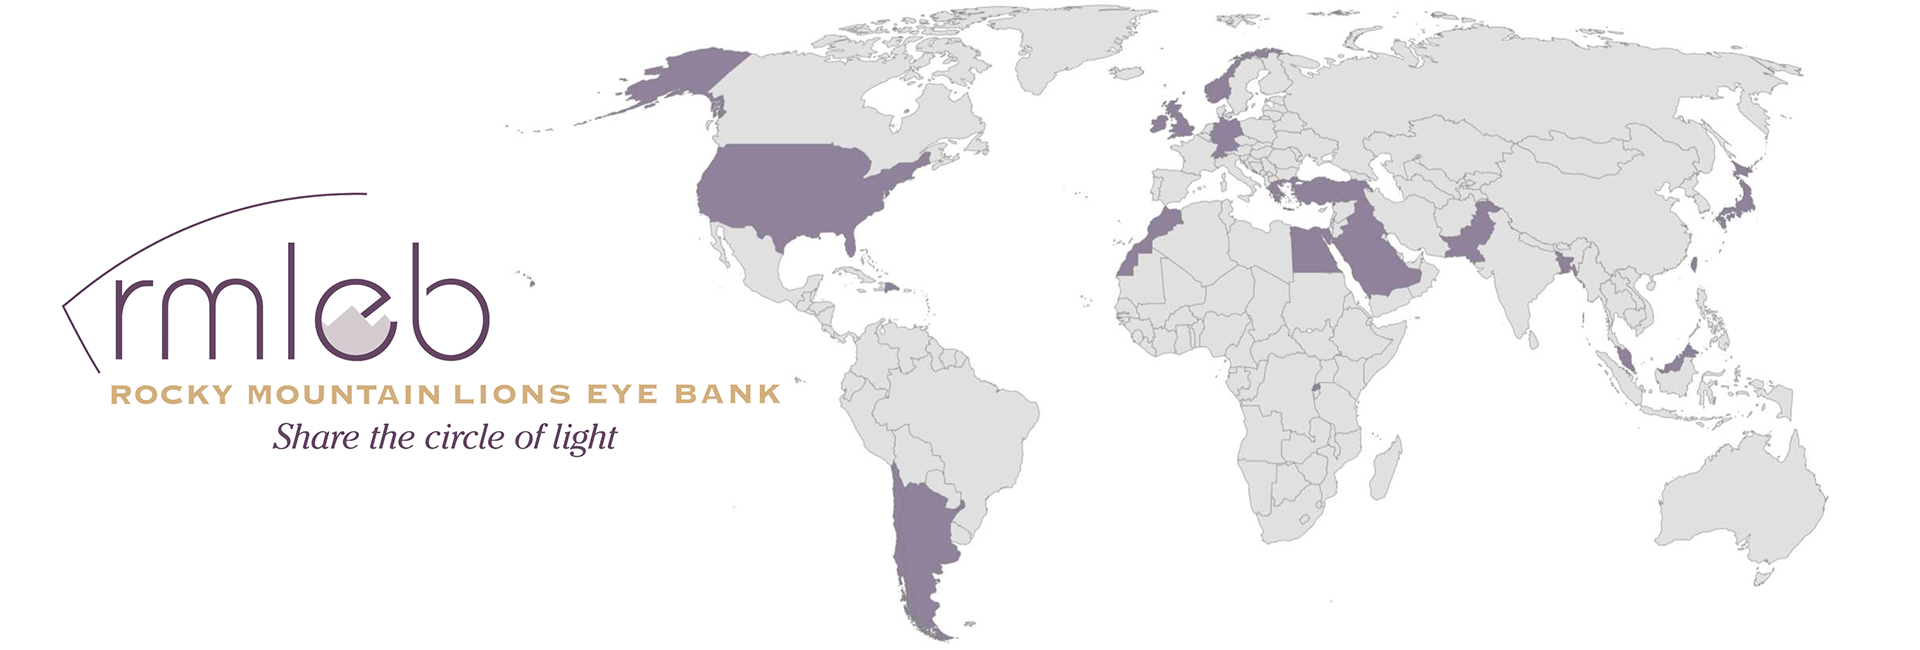 World map showing 22 different countries highlighted in purple. Beside the map is the RMLEB logo.